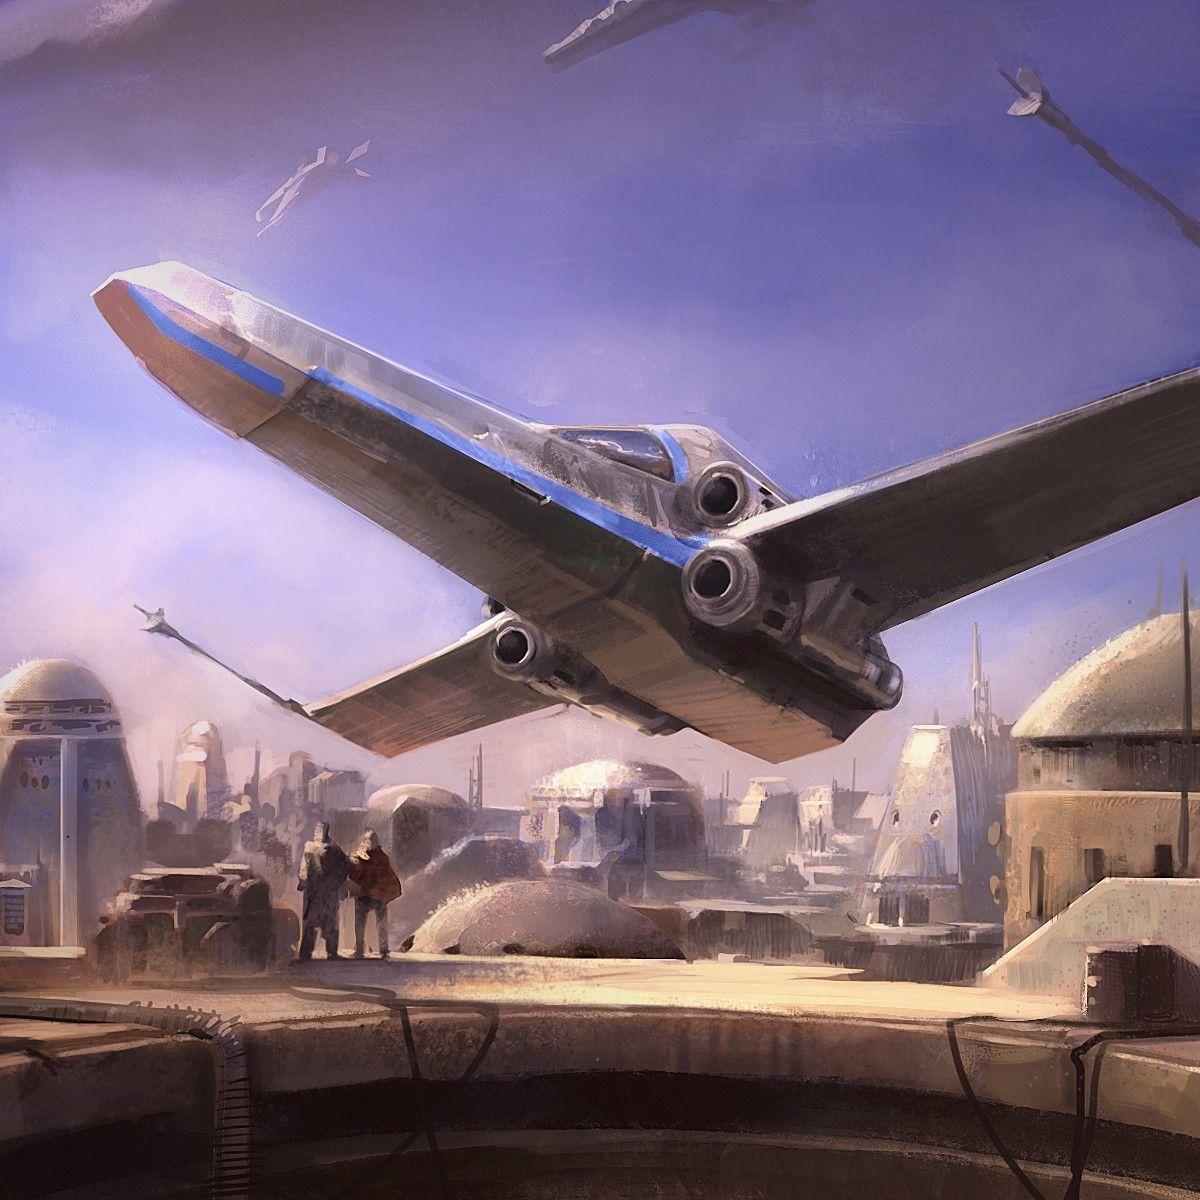 Star Wars, cityscapes, movies, futuristic, spaceships, science